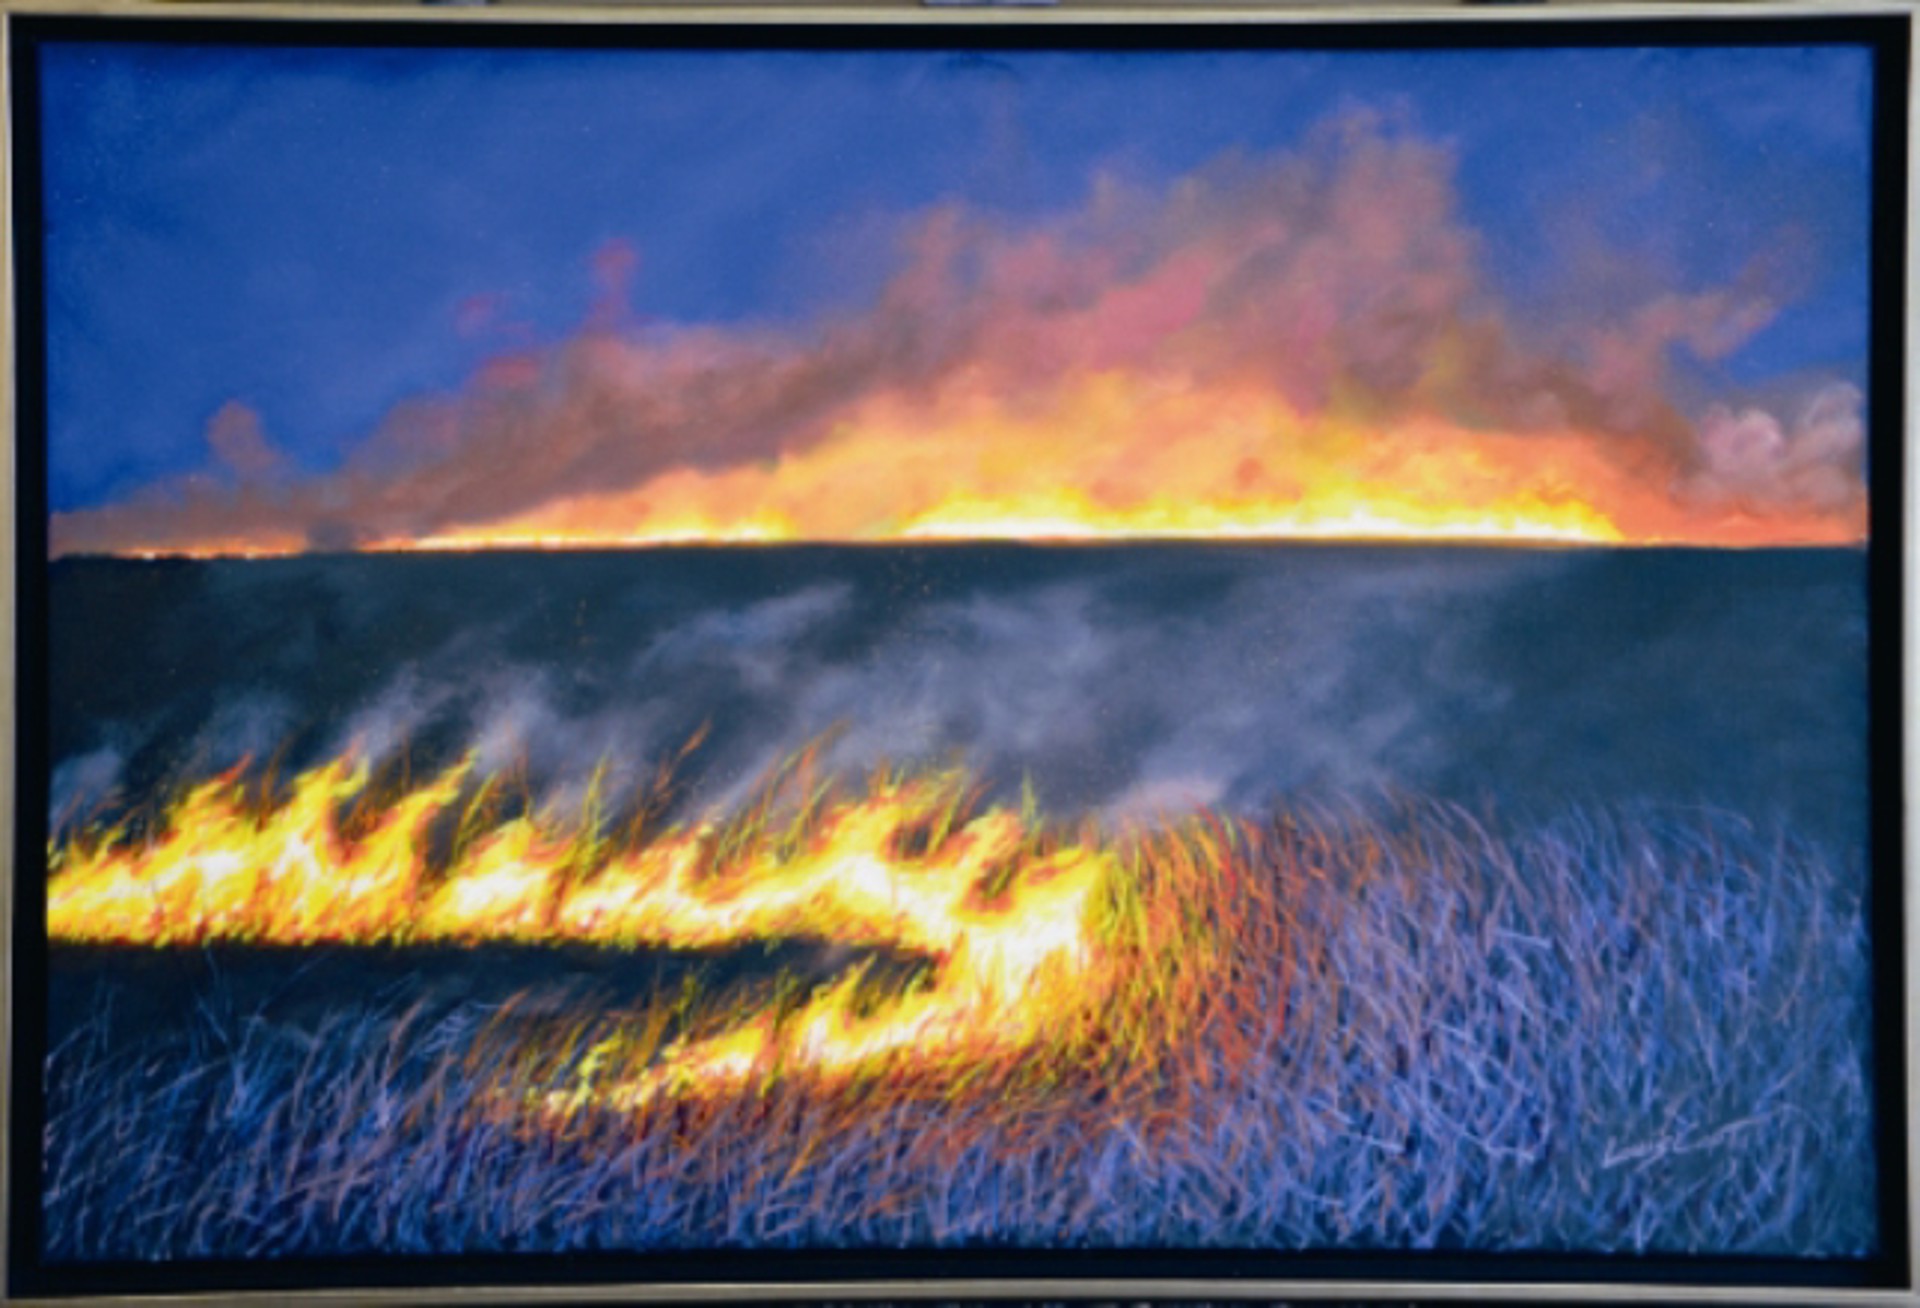 Fires Near Cottonwood Falls by Louis Copt